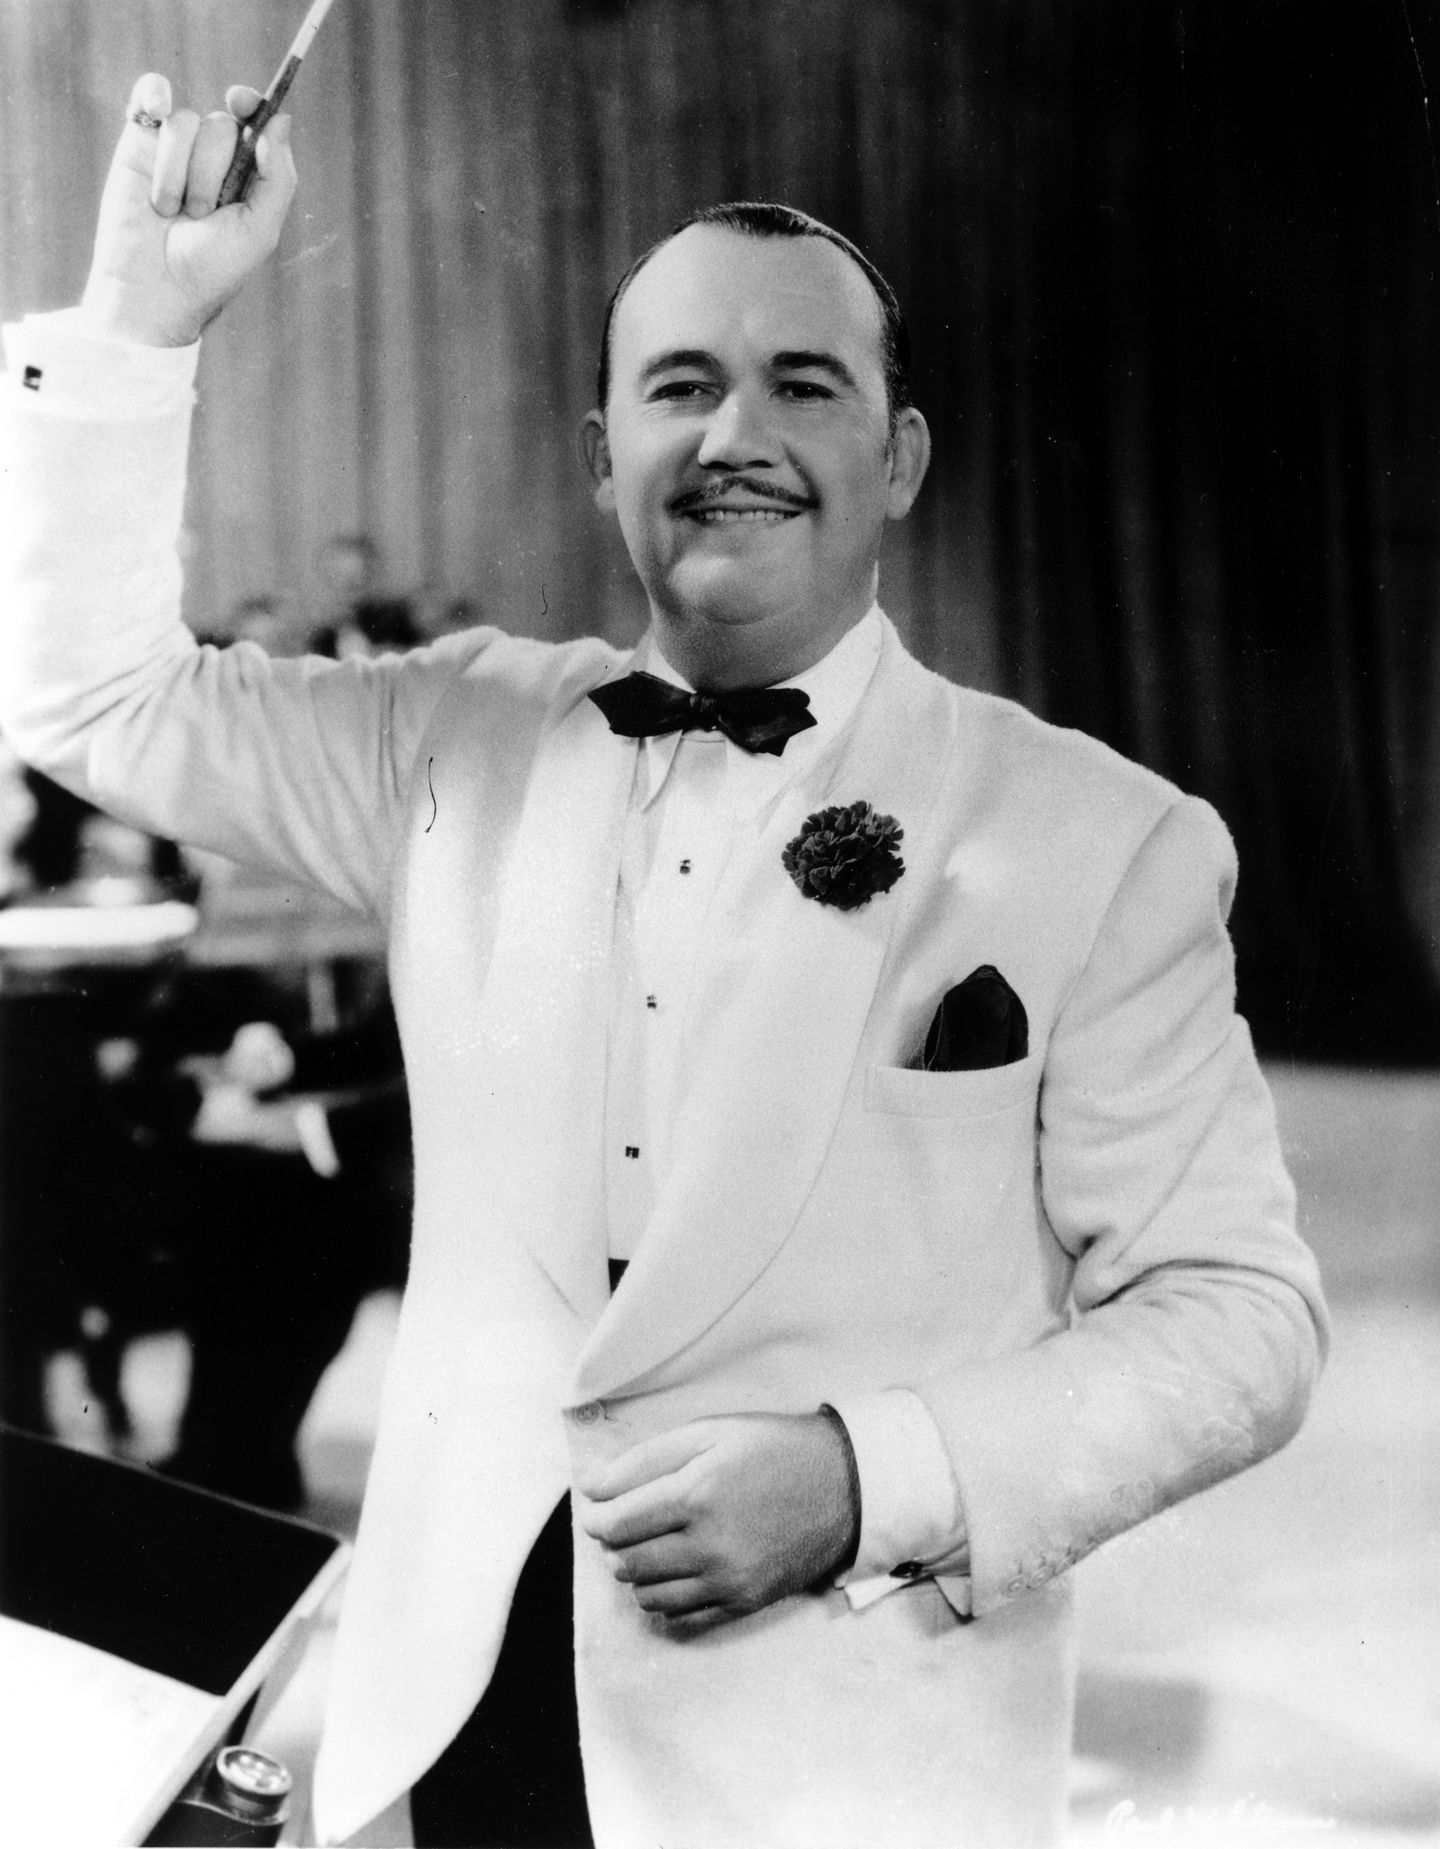 Paul Whiteman was considered the king of jazz